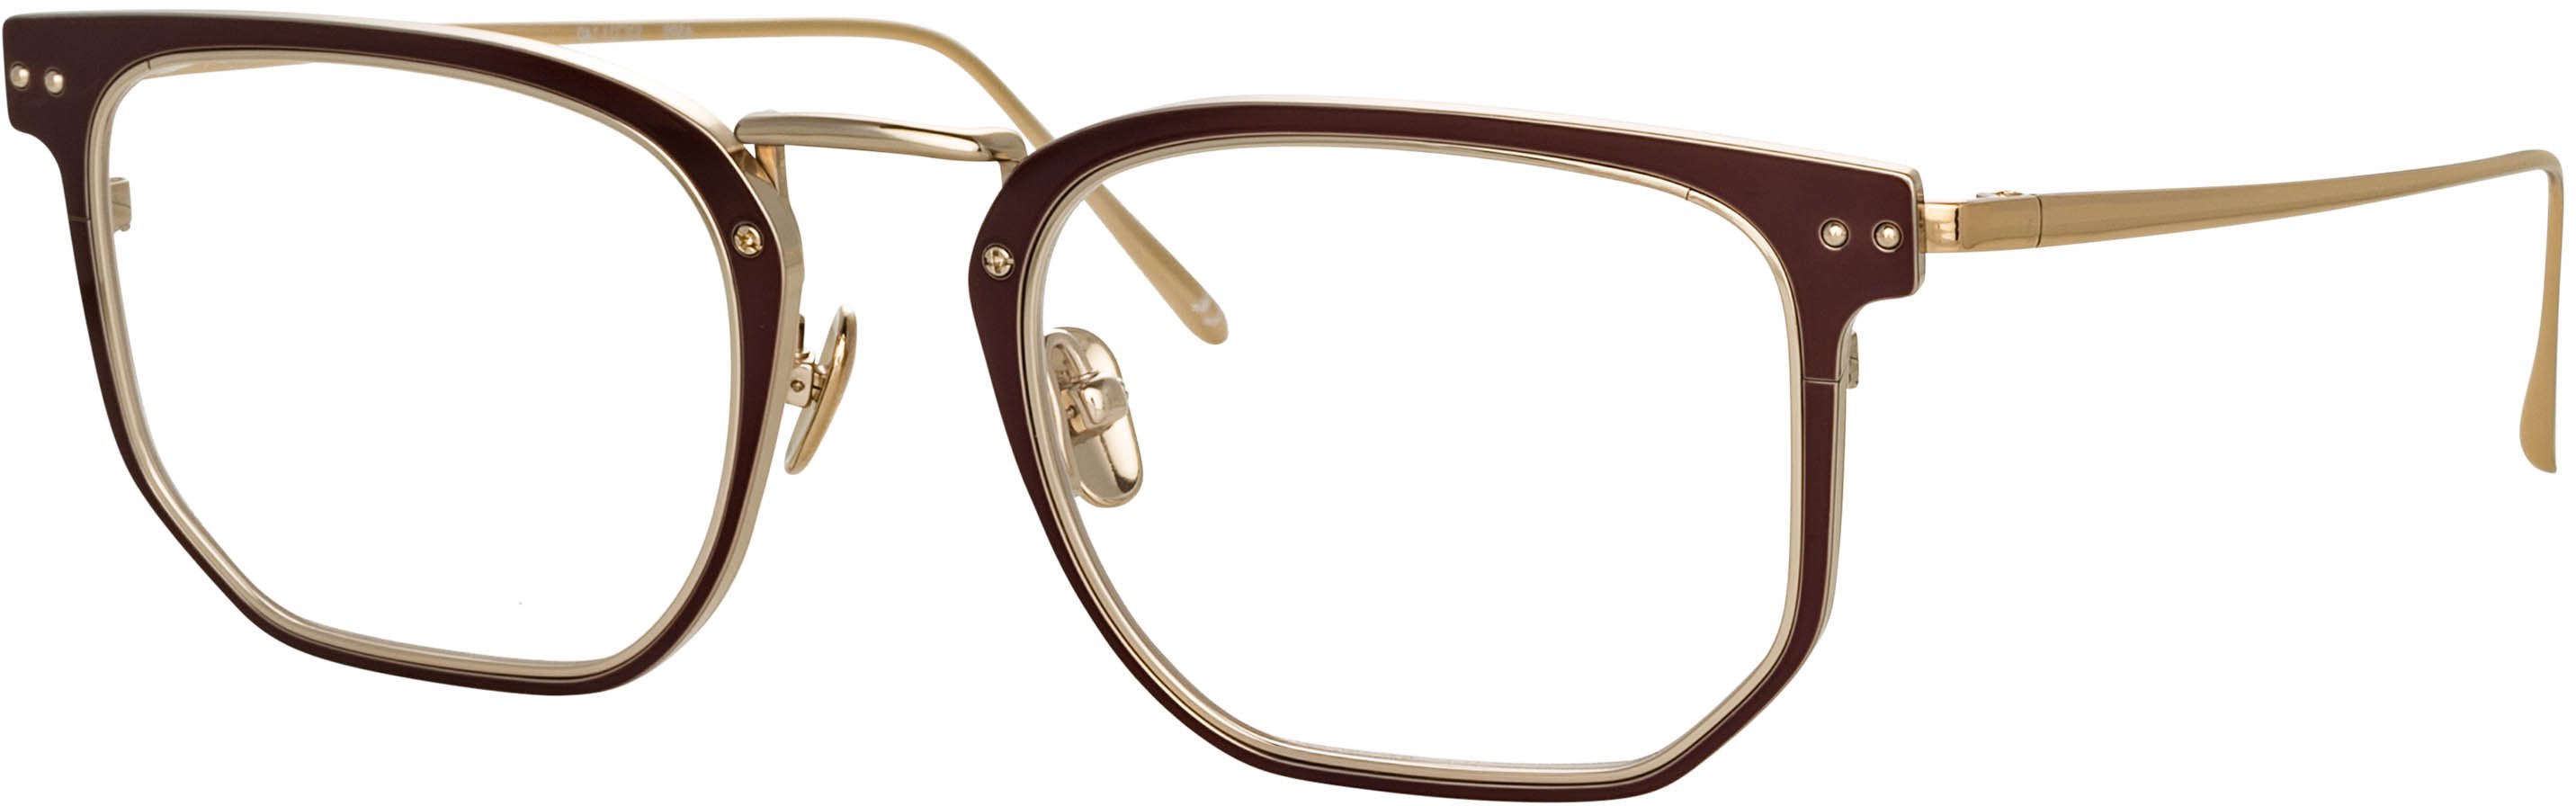 Color_LFL1113C3OPT - Saul D-Frame Optical Frame in Brown and Light Gold